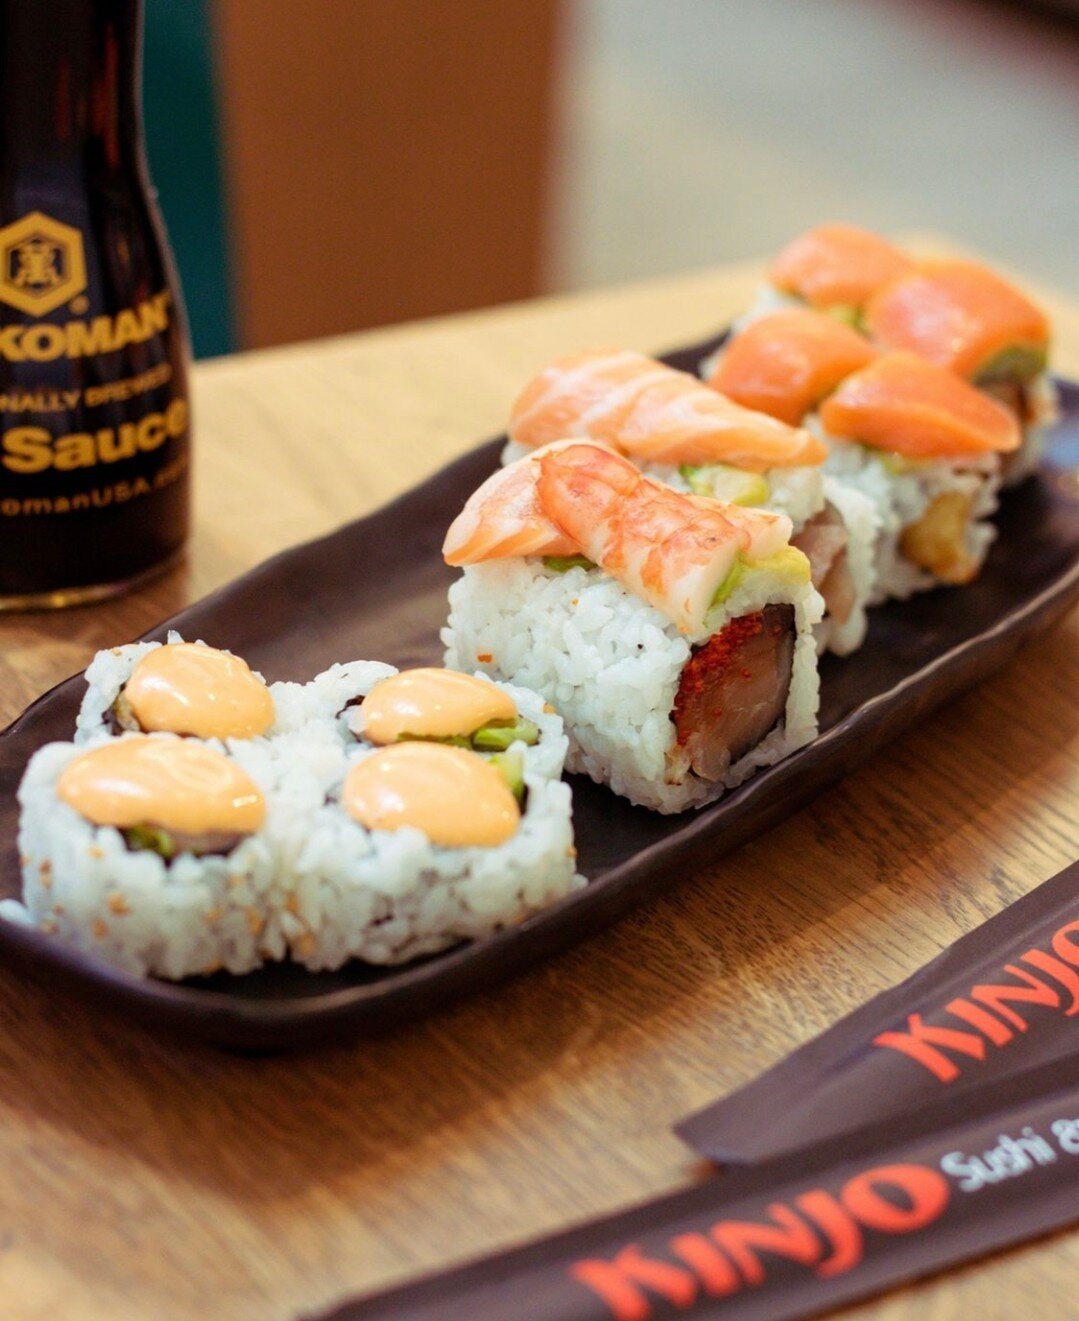 Saturdays call for delicious sushi at @kinjo_sushi in @westhillstownecentre. Open 11 am to 10 pm every day of the week!

📸 @kinjo_sushi